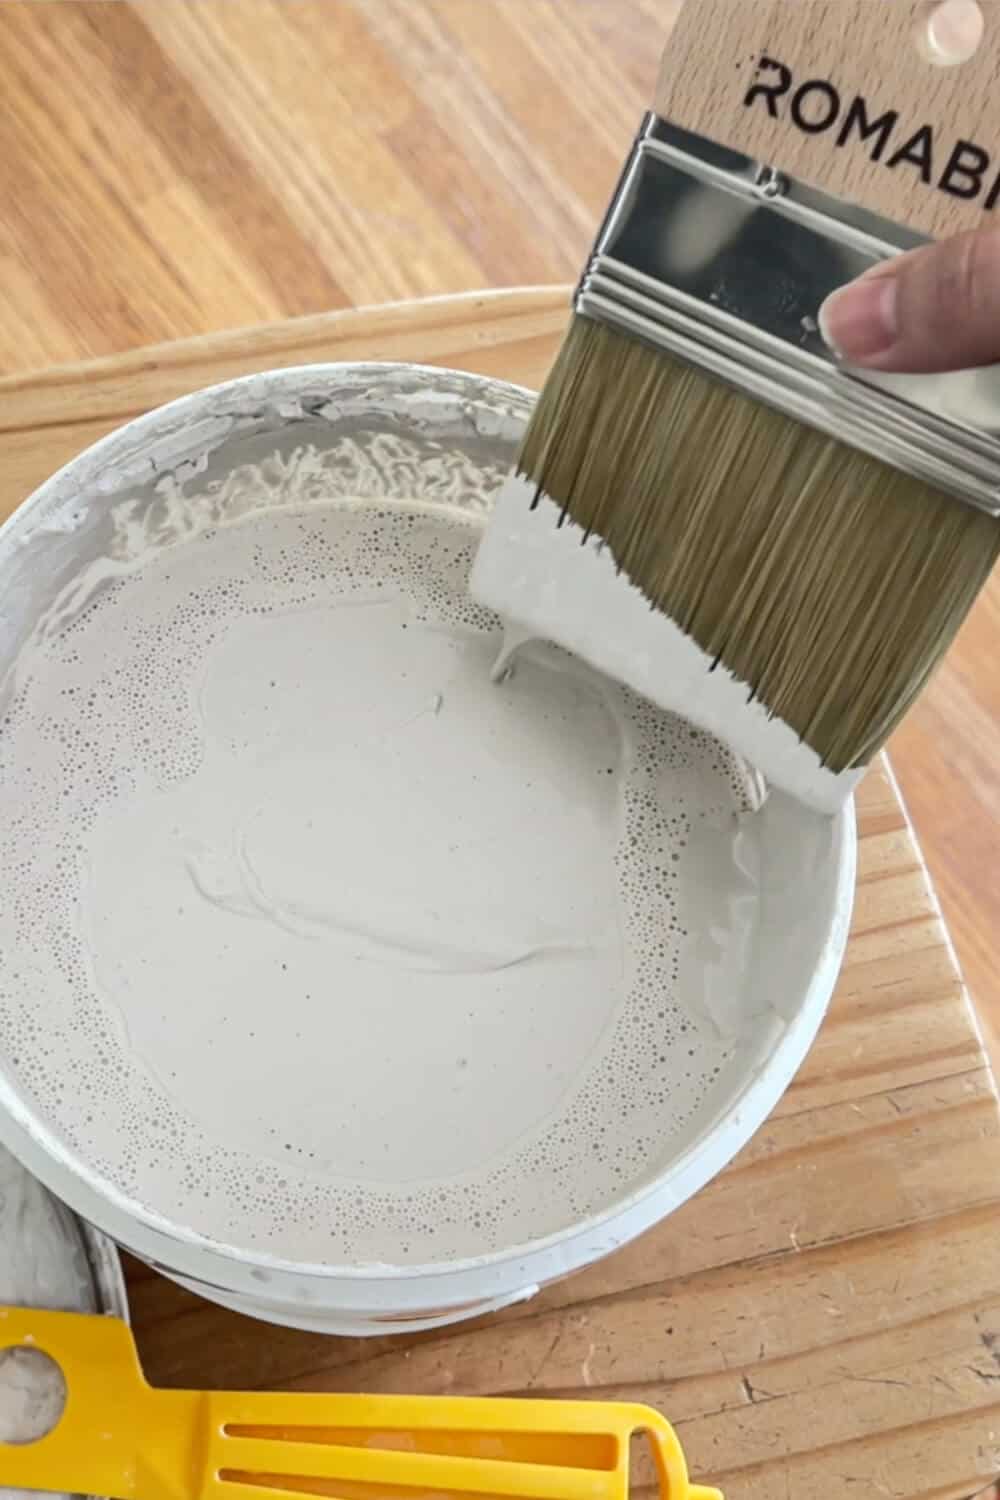 dipping a spalter brush into a bucket filled with limewash paint